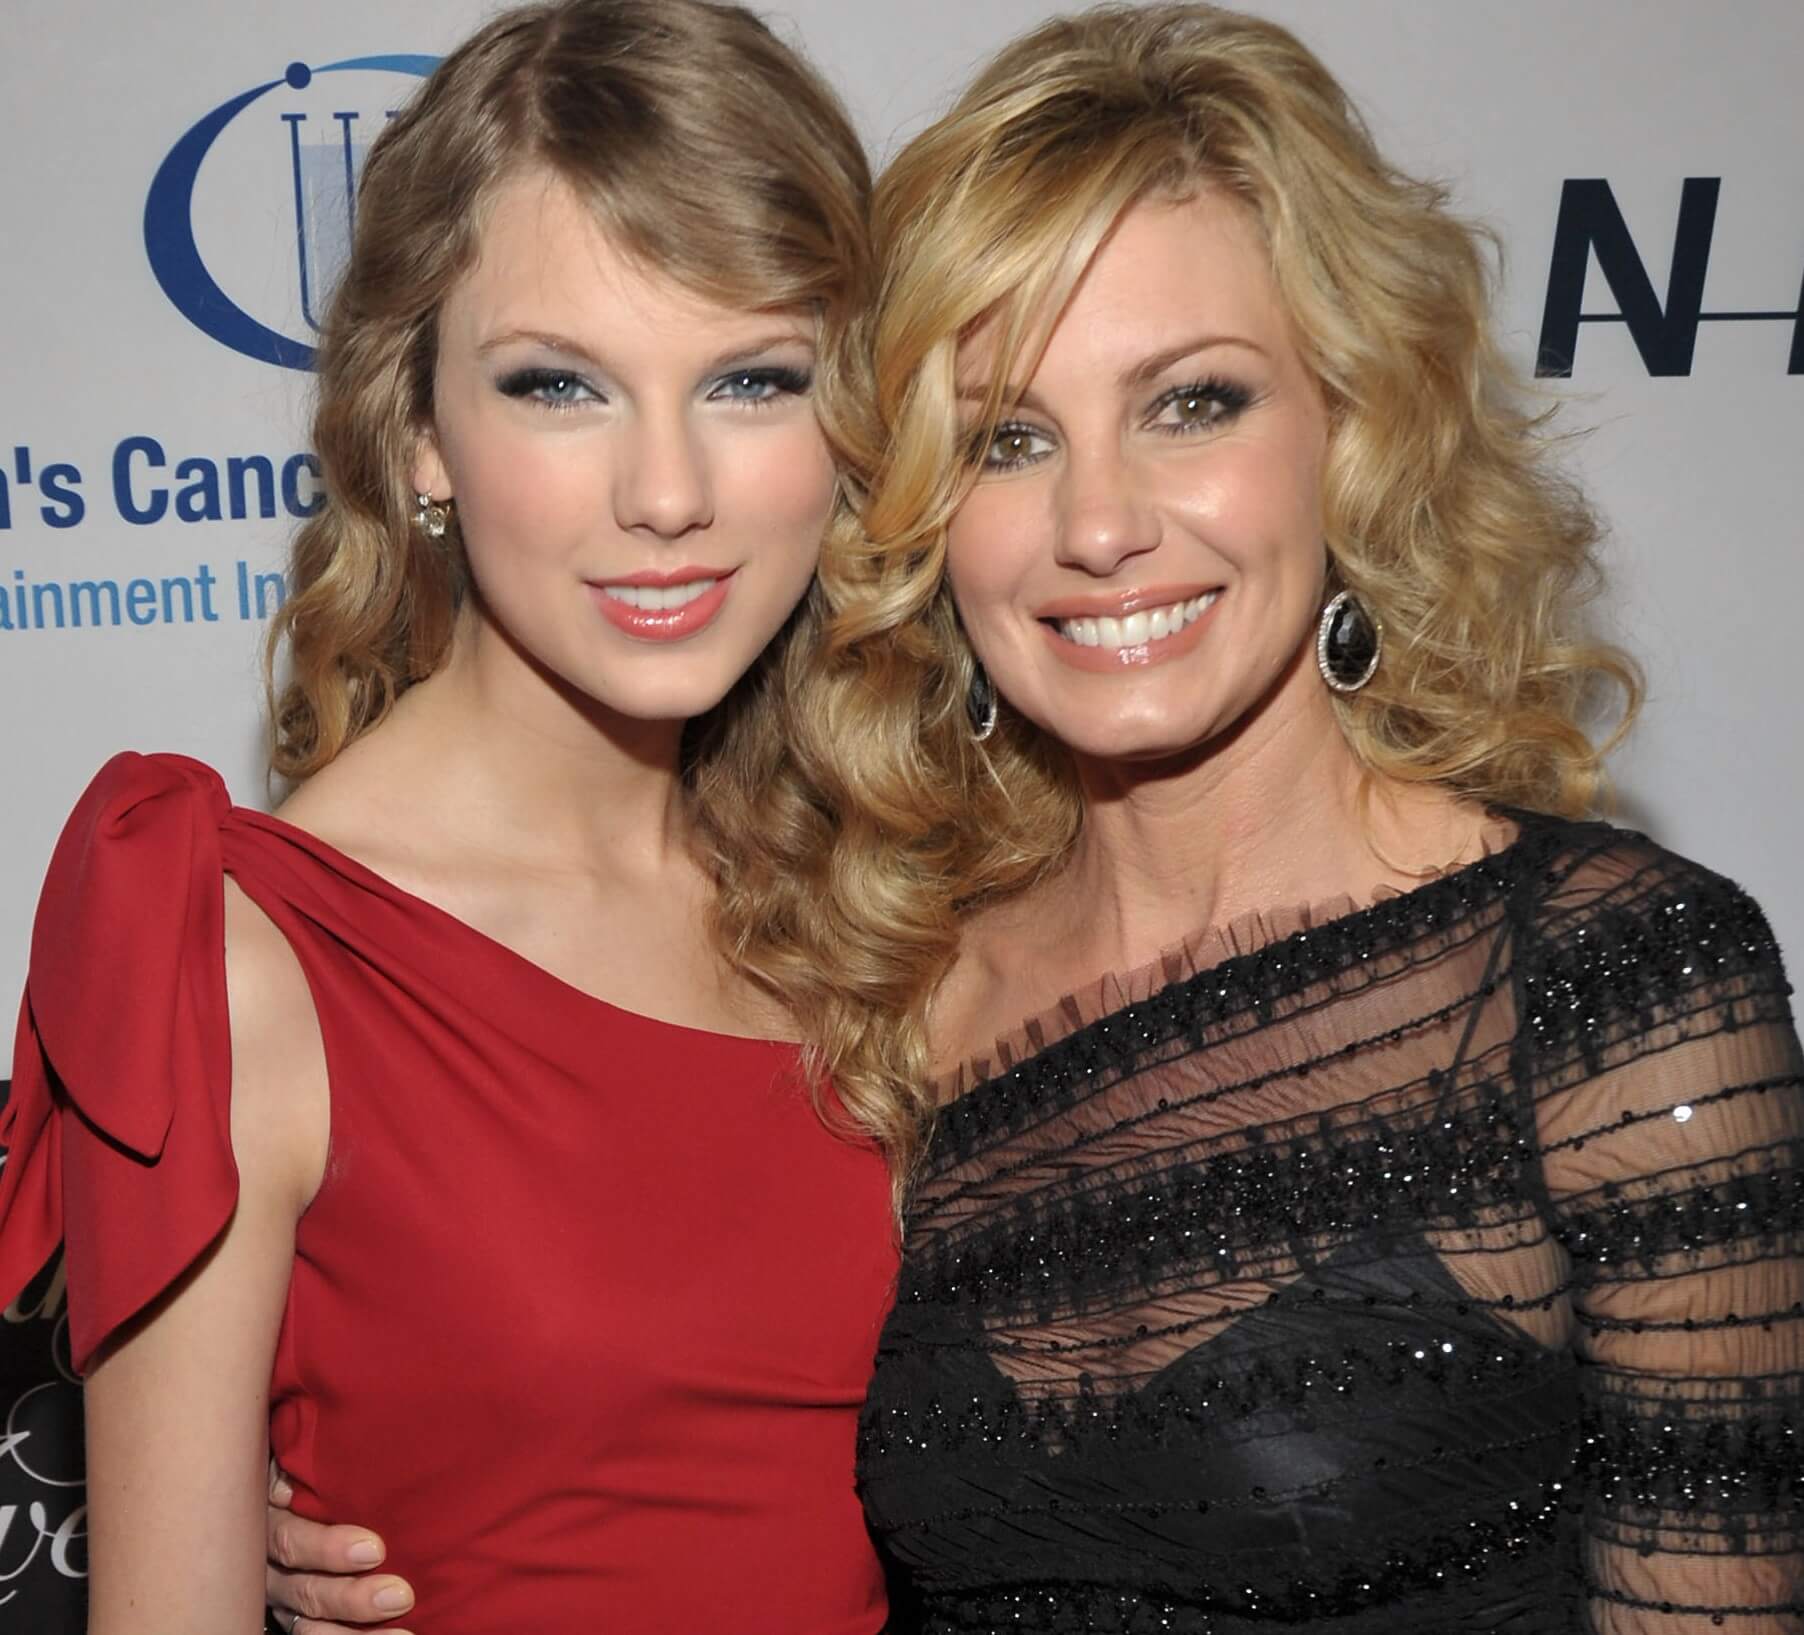 Taylor Swift and Faith Hill smiling